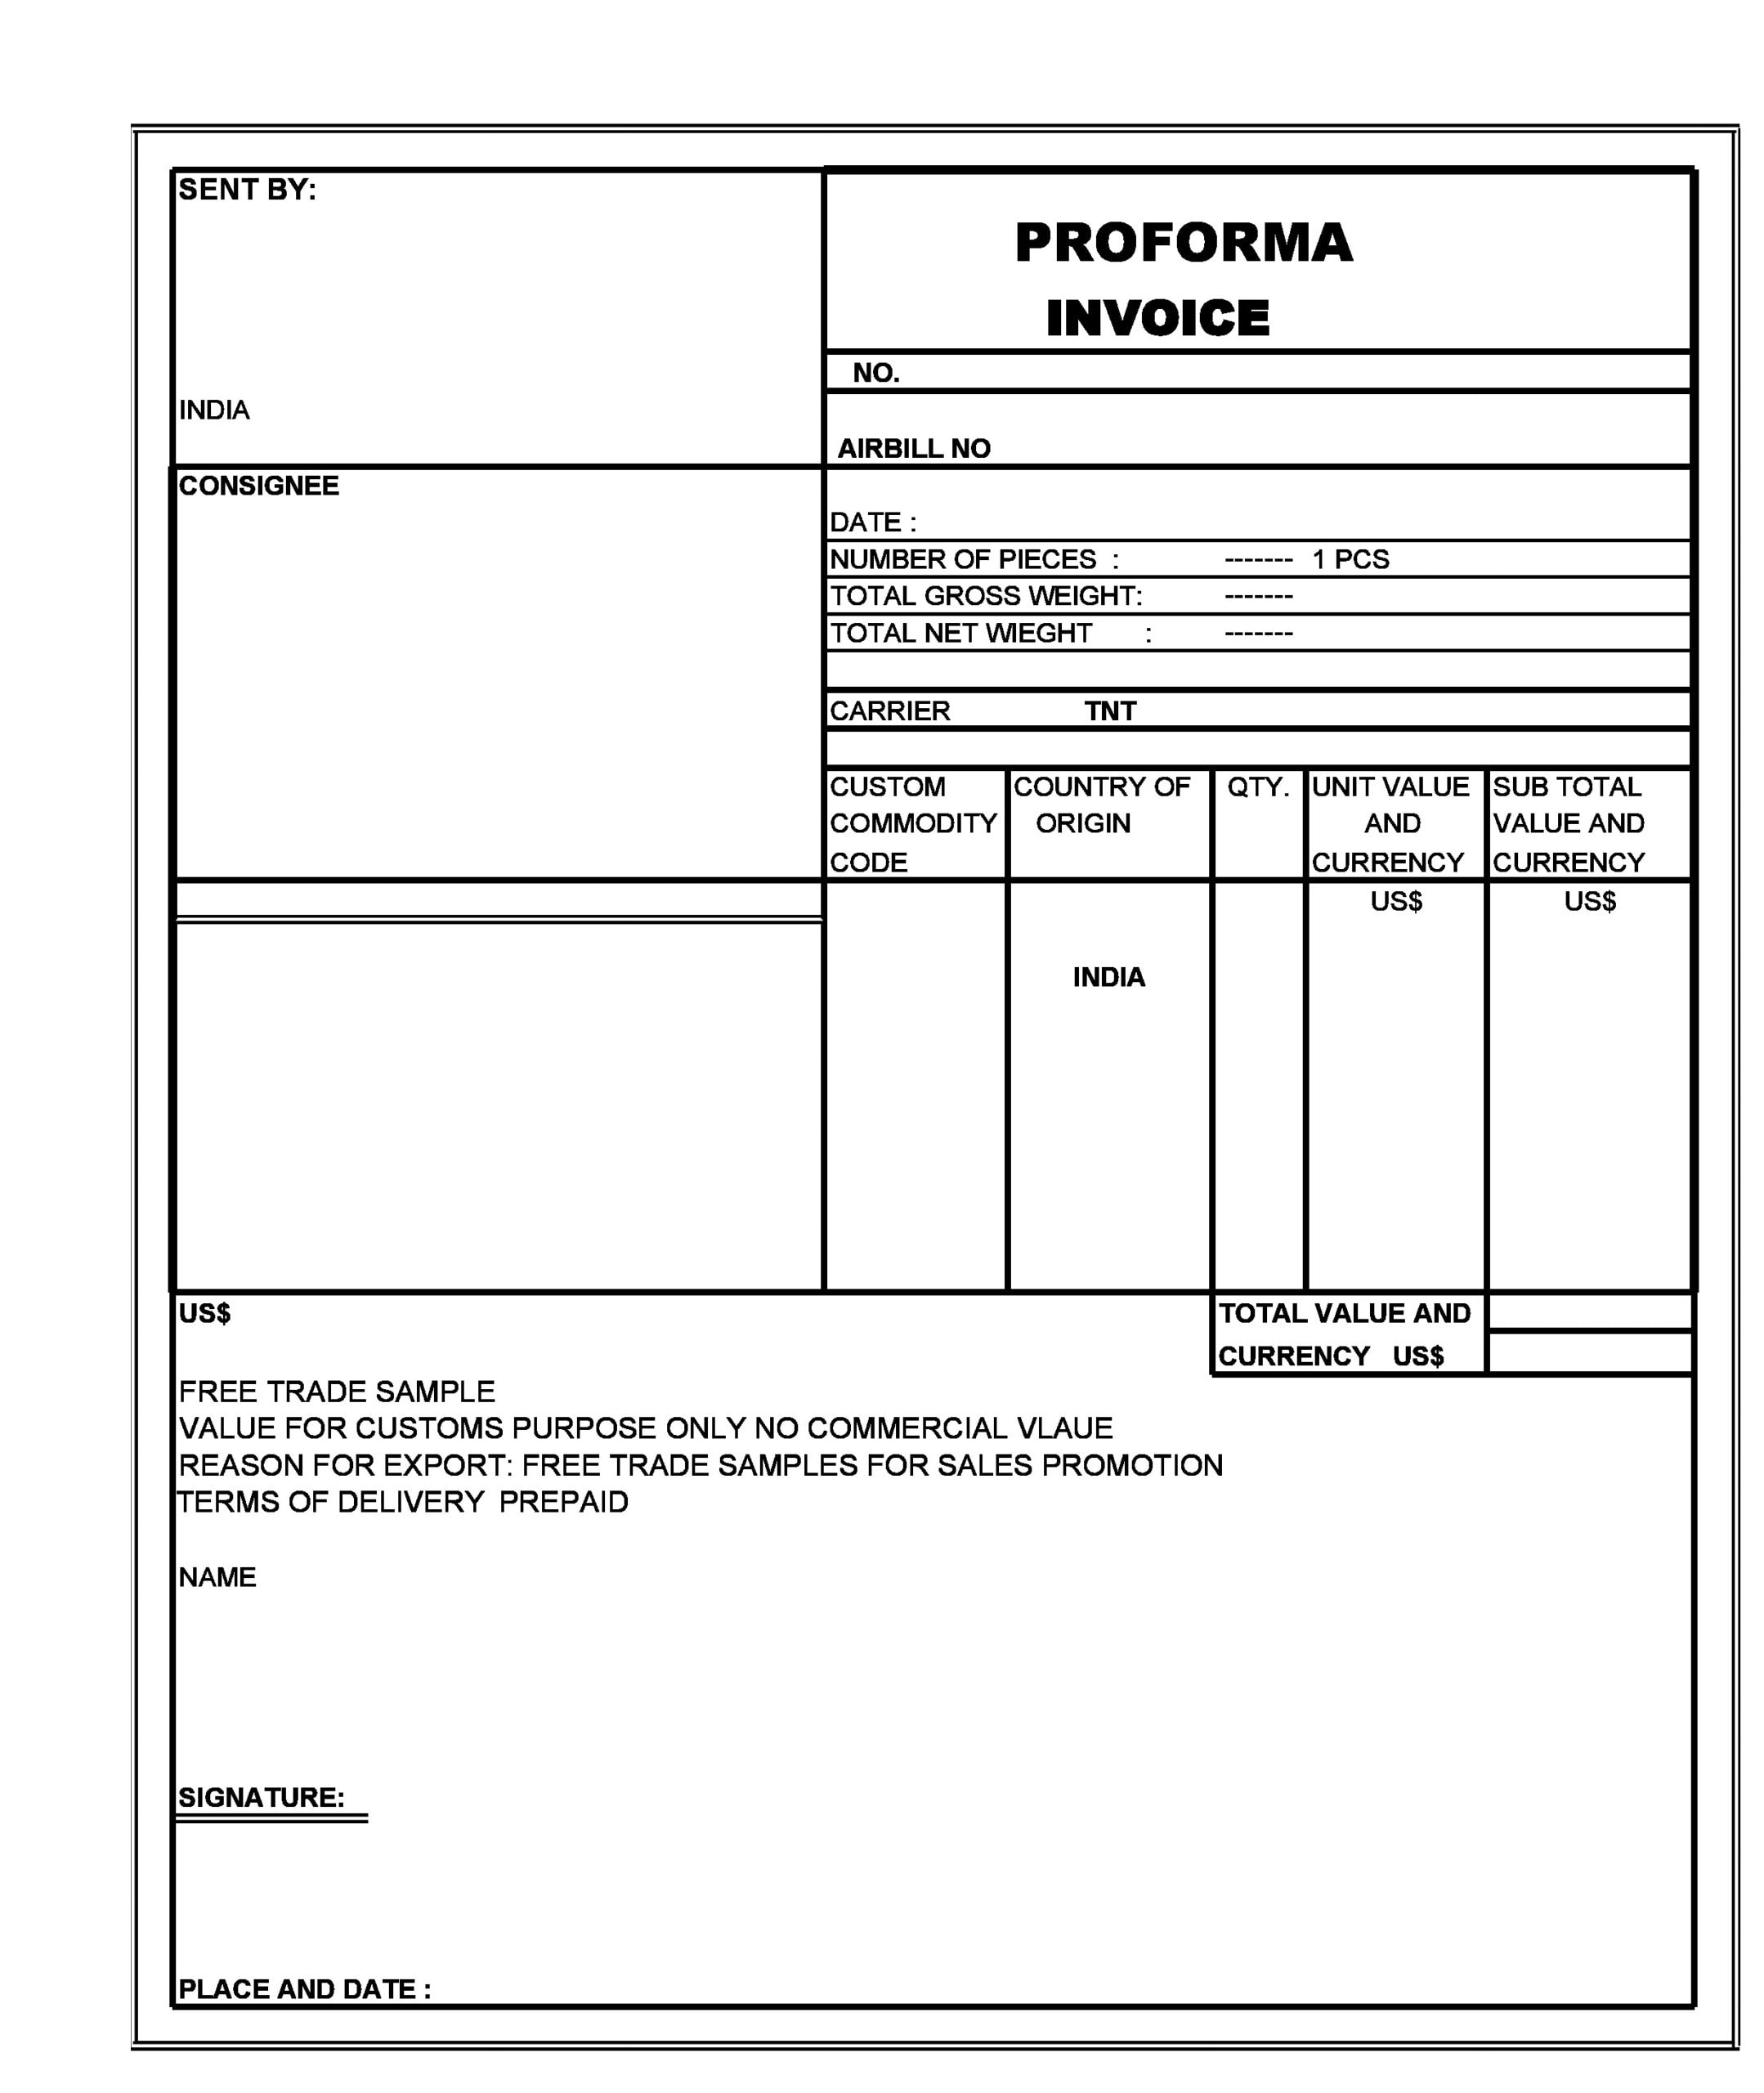 30 Free Proforma Invoice Templates Excel Word PDF TemplateArchive